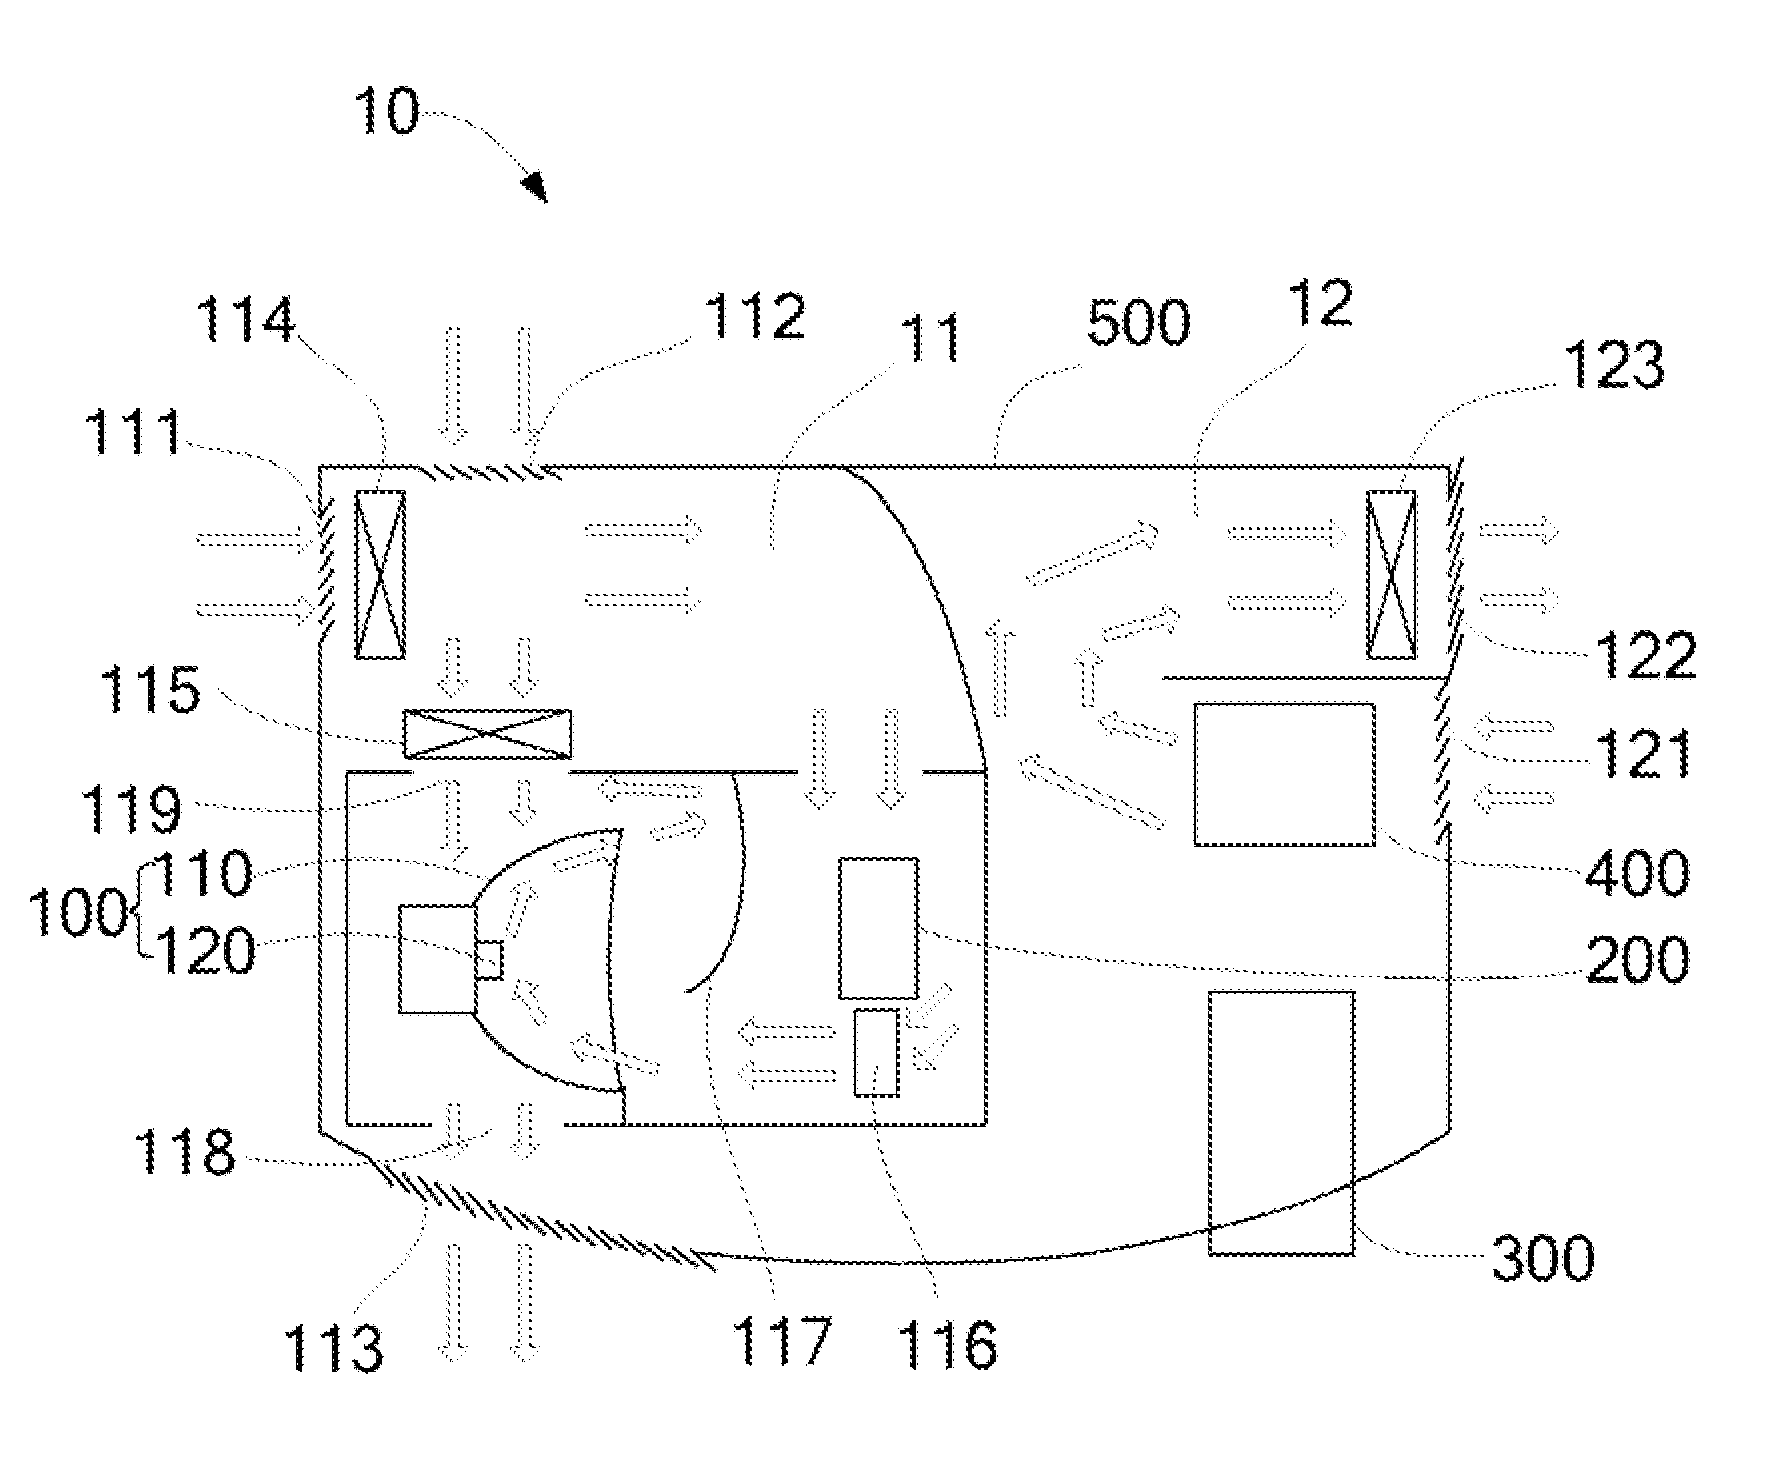 Projector with zone cooling configuration and method for cooling a projector using zone cooling configuration